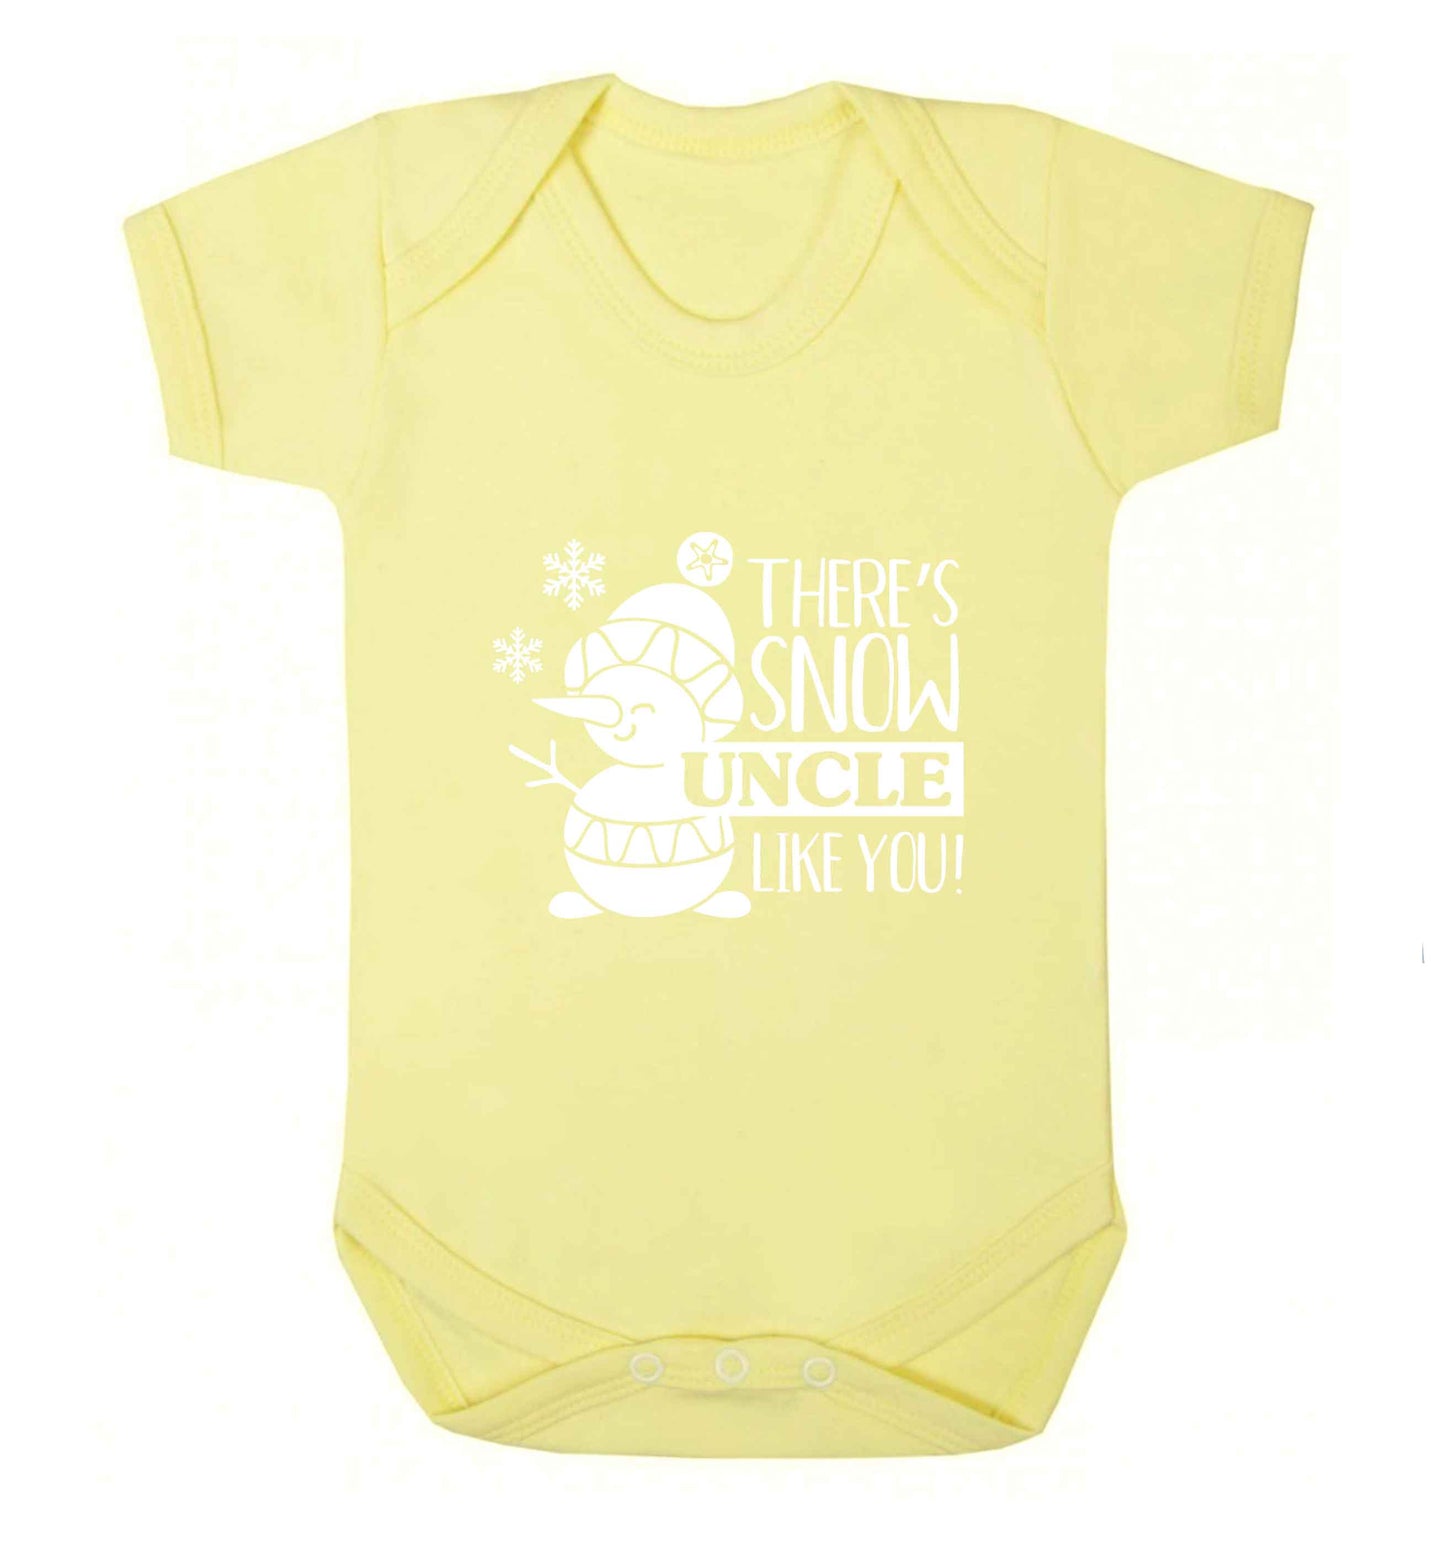 There's snow uncle like you baby vest pale yellow 18-24 months